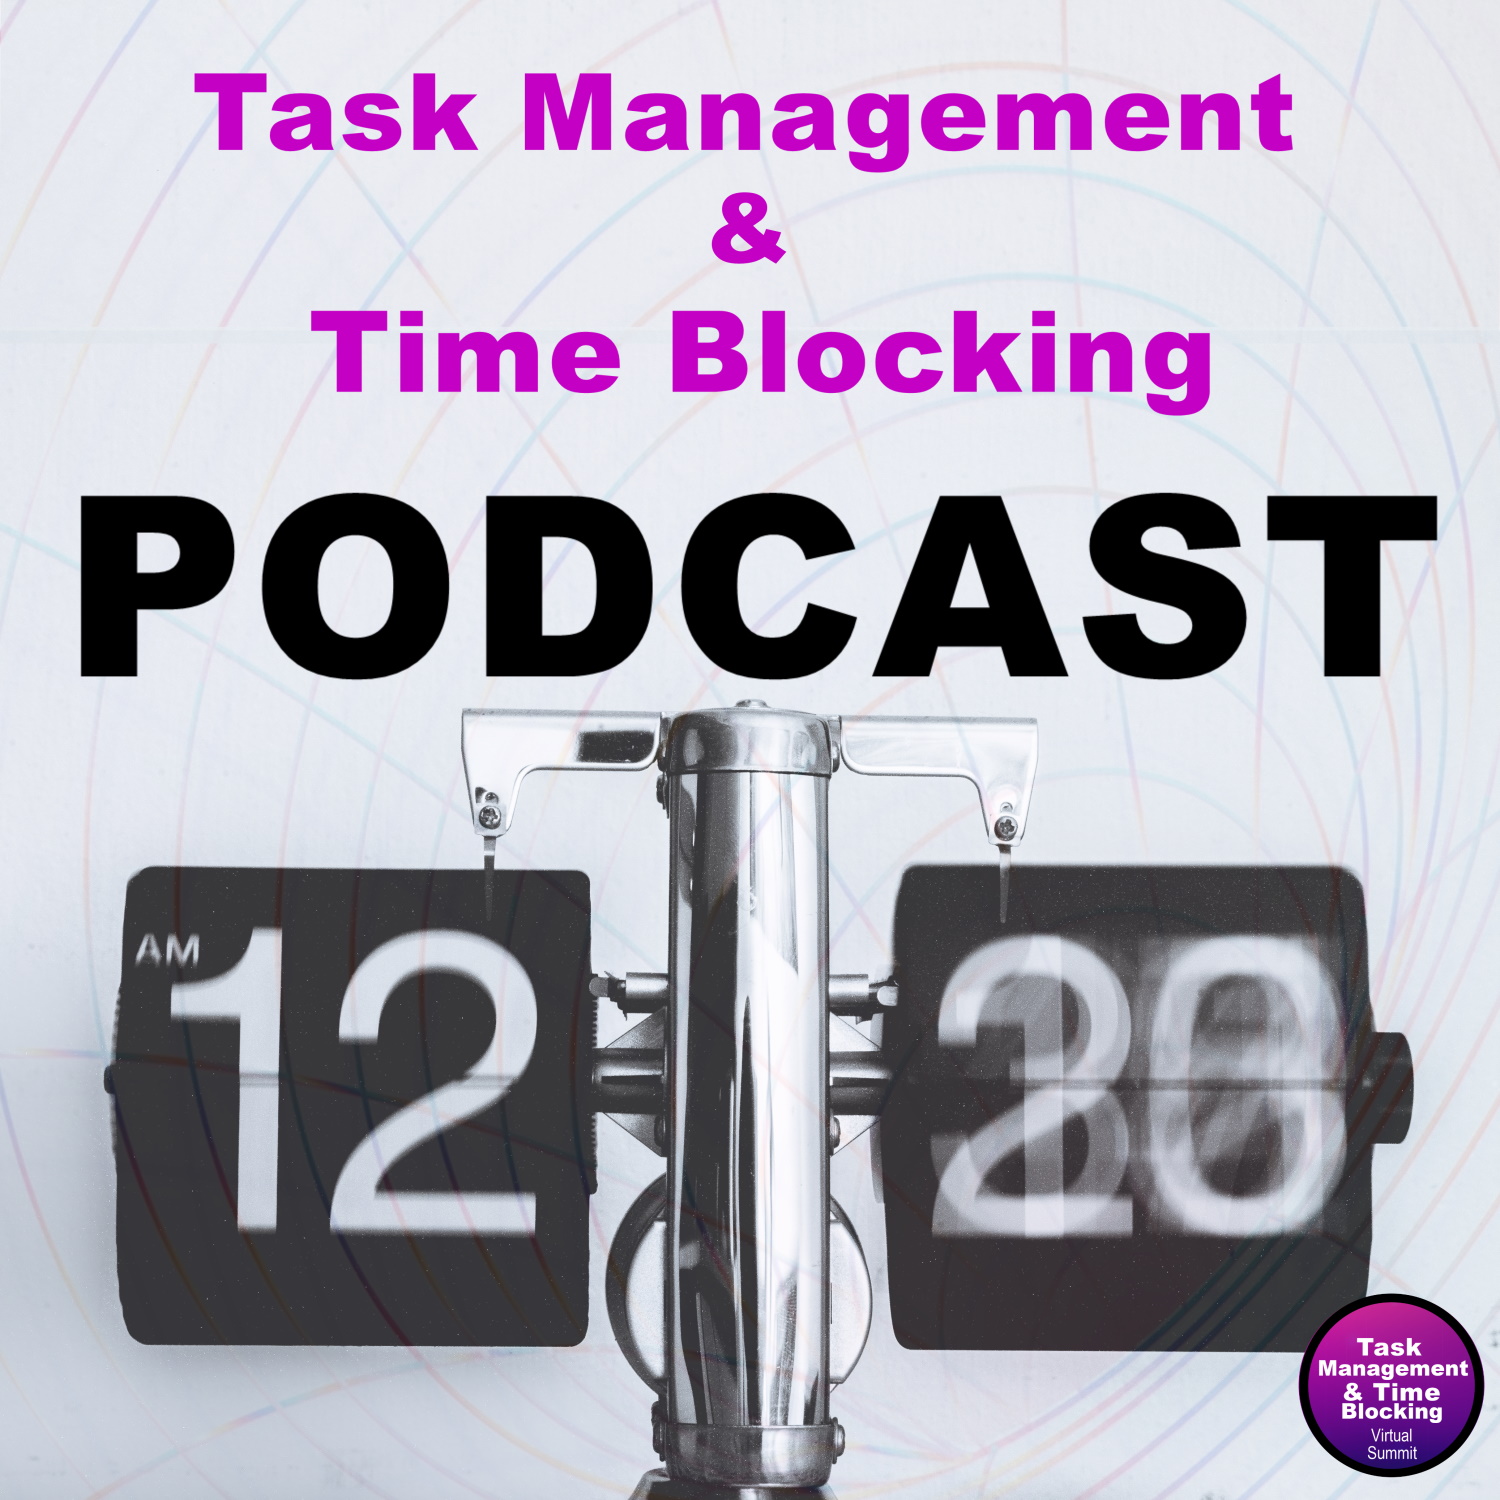 The Task Management & Time Blocking Podcast